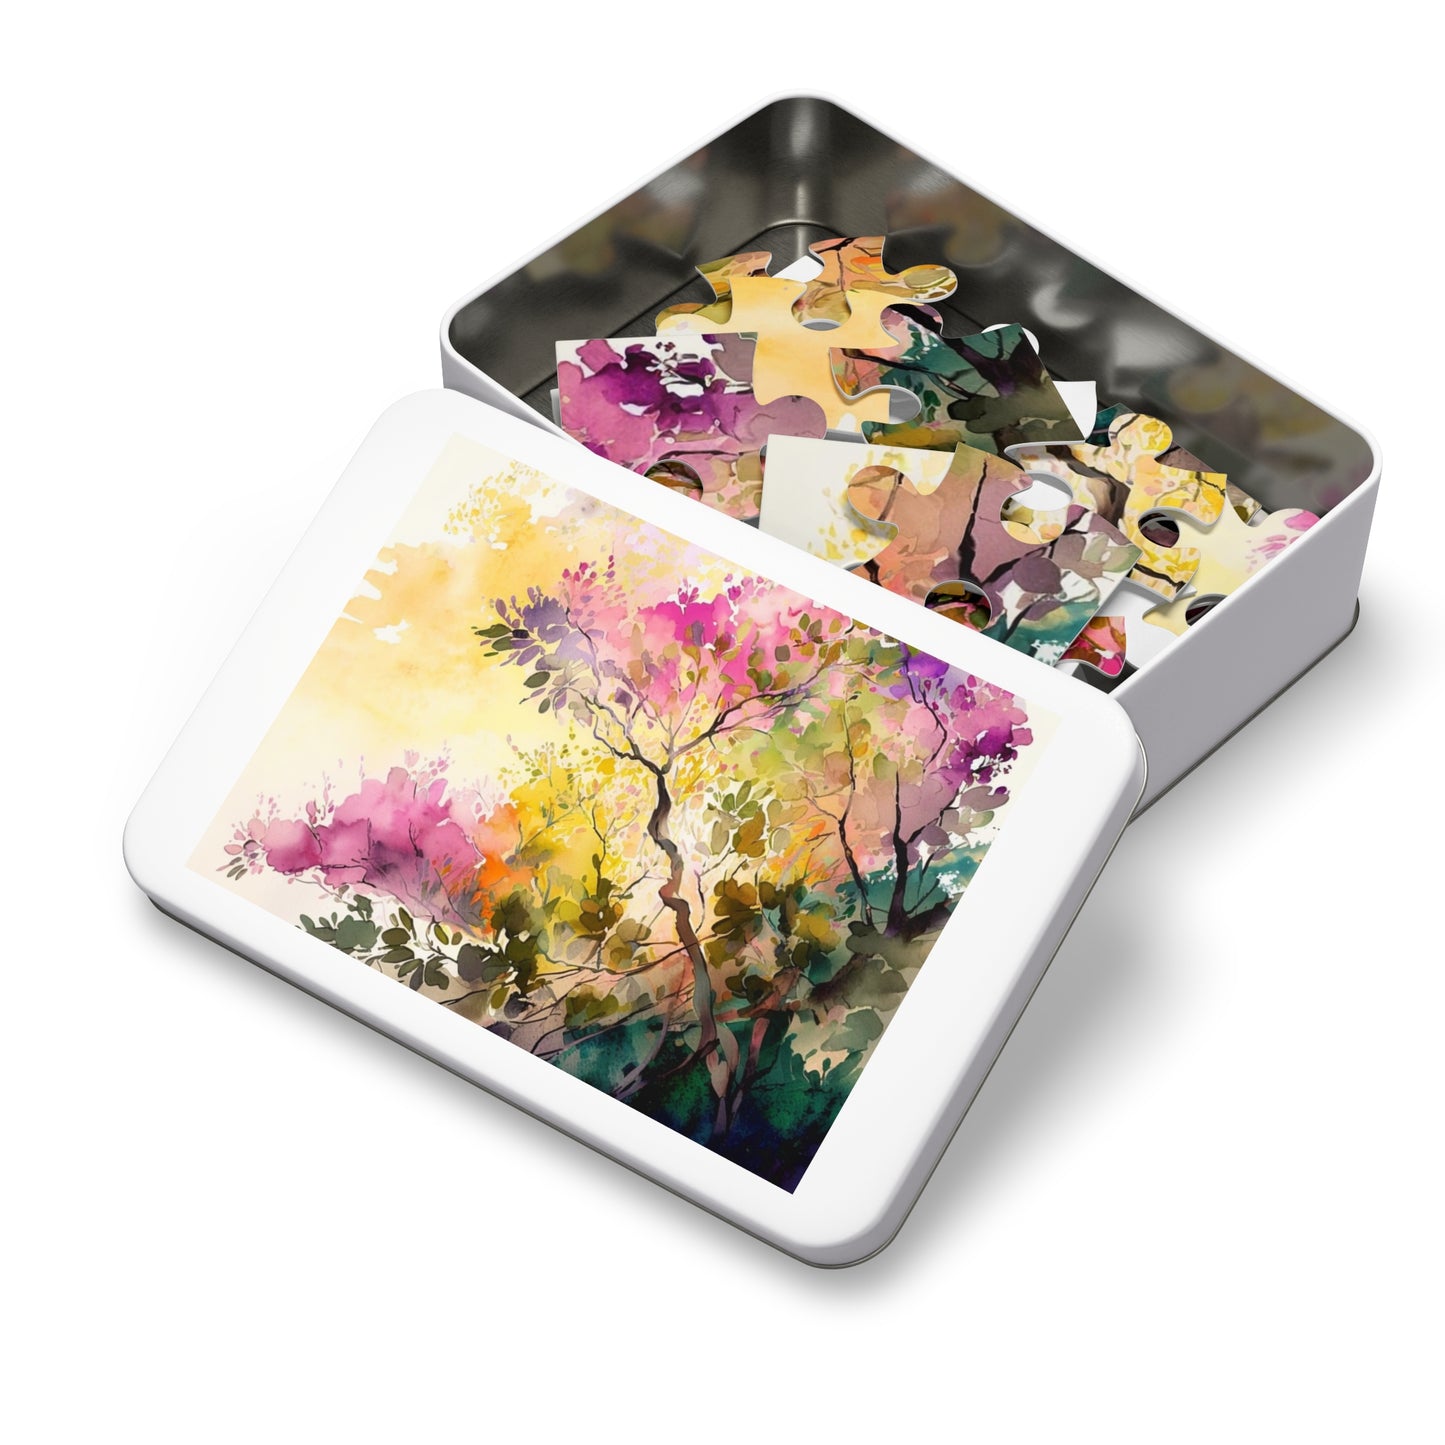 Jigsaw Puzzle (30, 110, 252, 500,1000-Piece) Mother Nature Bright Spring Colors Realistic Watercolor 2